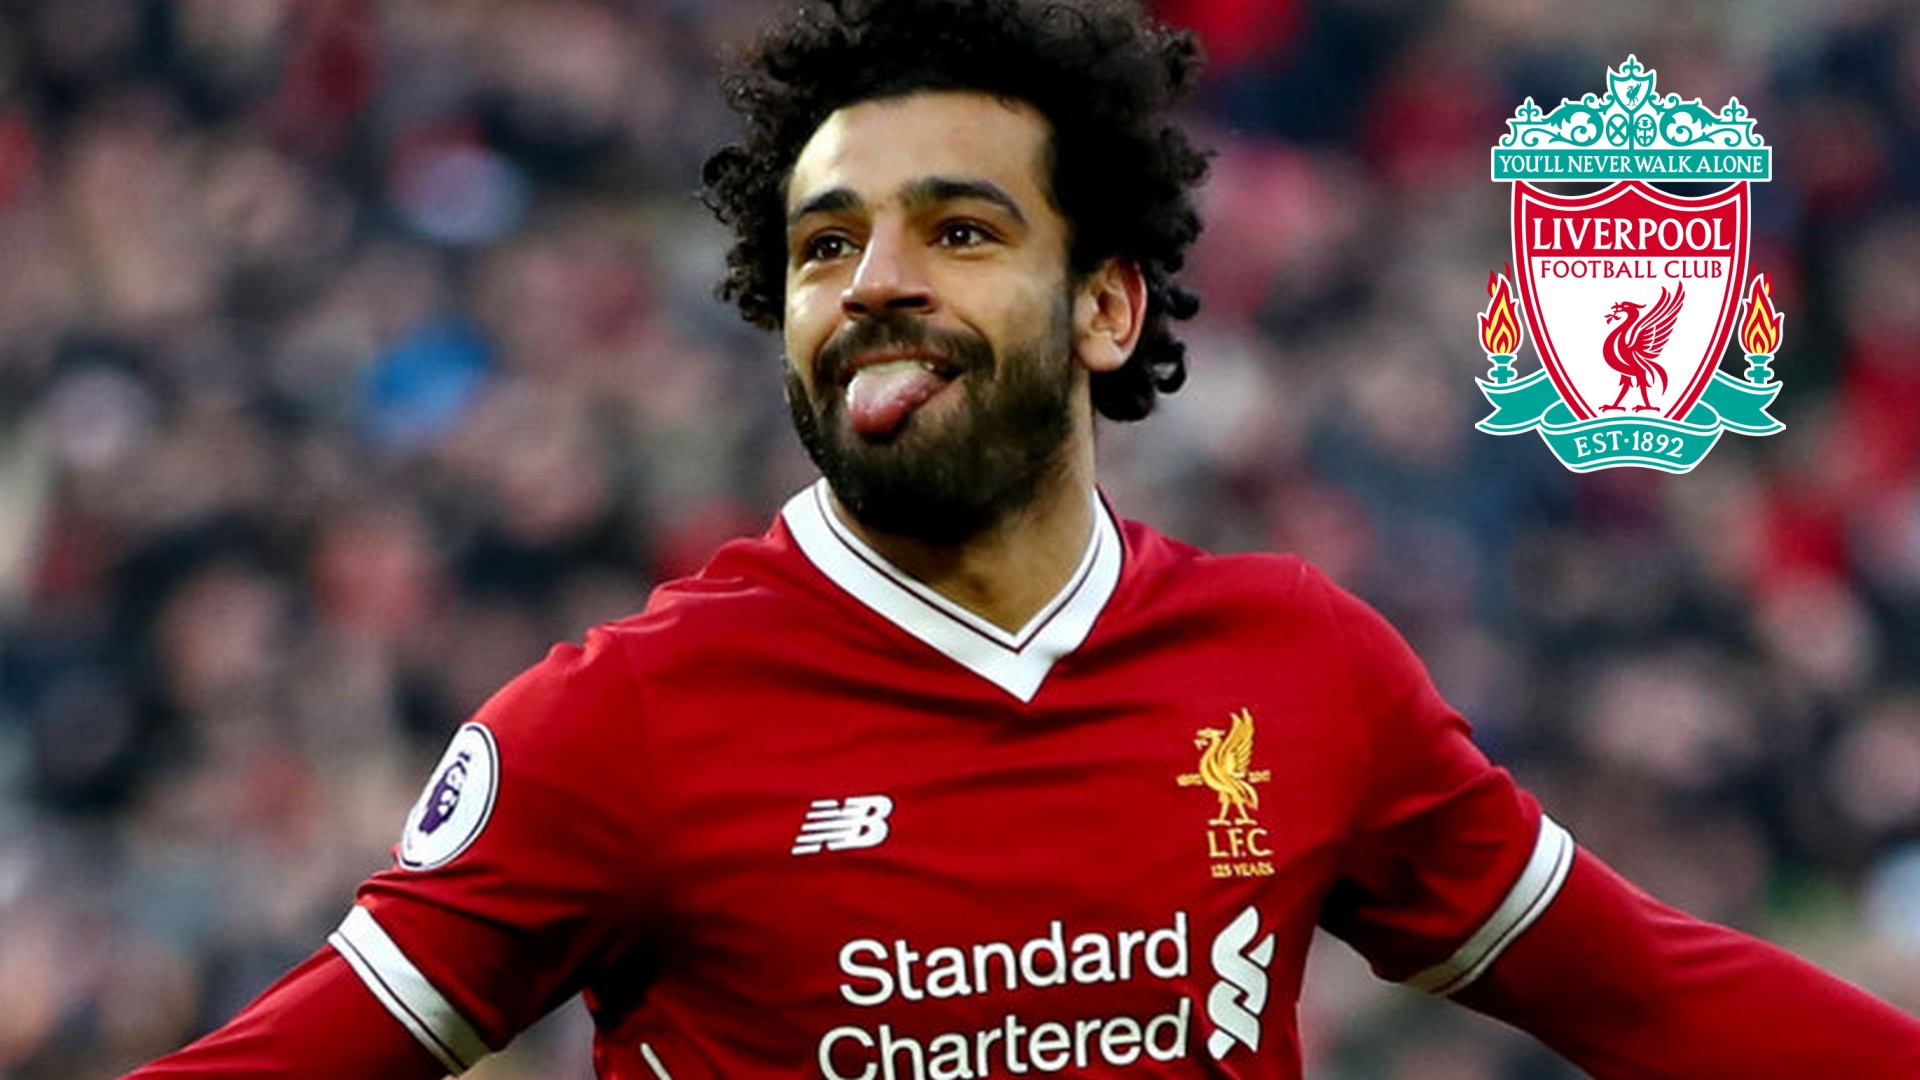 Liverpool Mohamed Salah HD Wallpaper with image resolution 1920x1080 pixel. You can make this wallpaper for your Desktop Computer Backgrounds, Mac Wallpapers, Android Lock screen or iPhone Screensavers